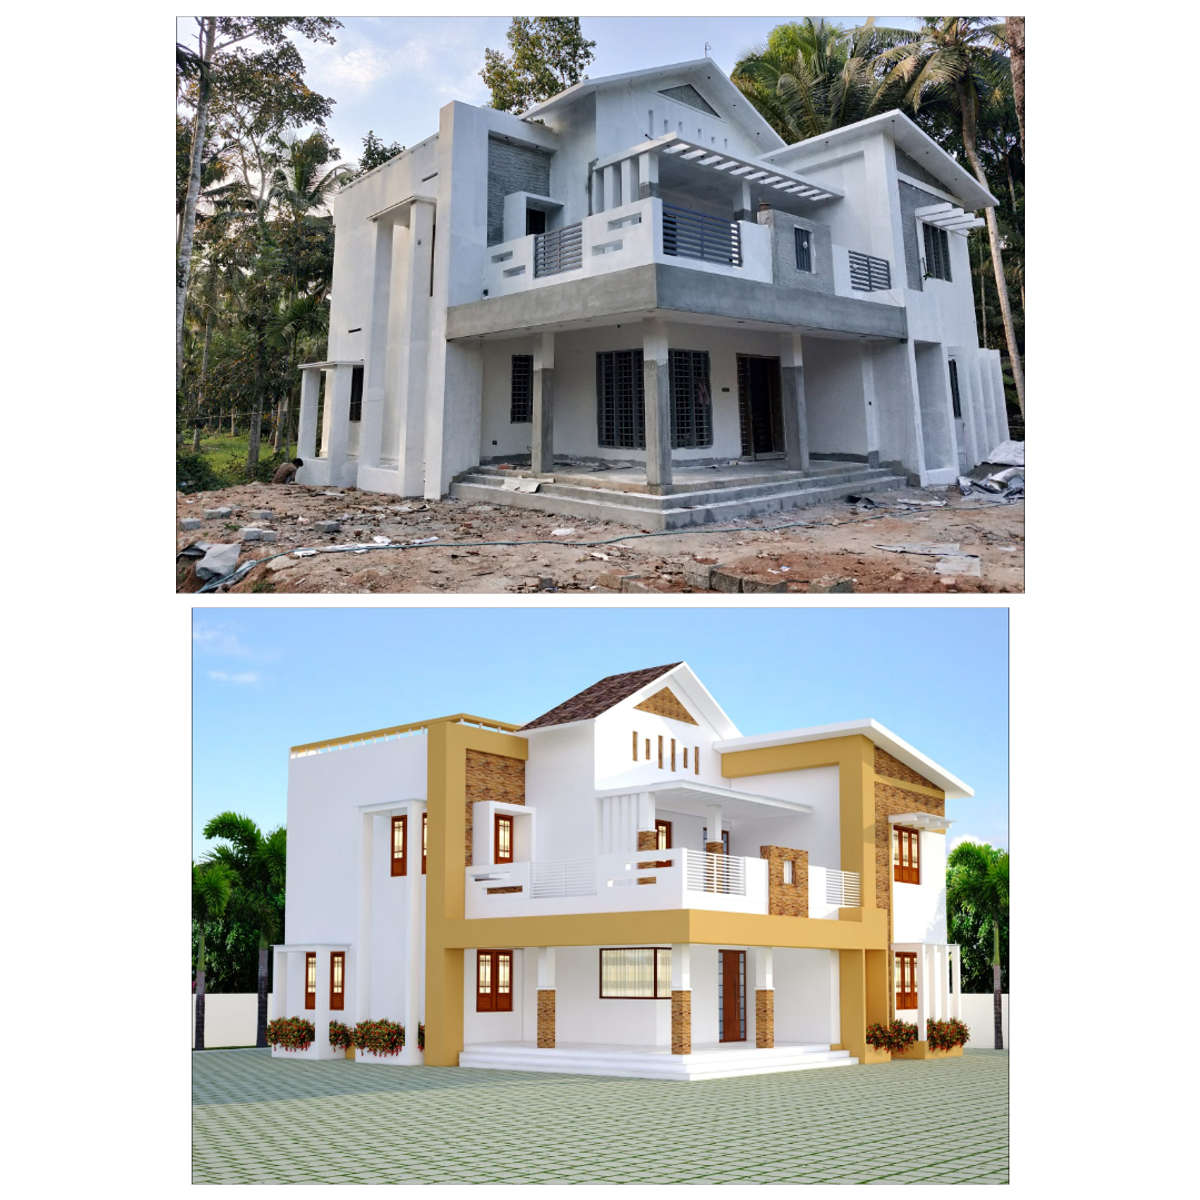 Finished project of Mars Homes @Kattachira, Kayamkulam.
mob :9995214229
Area : 2555 sqft
Plot area: 14.5 Cents
Client Name : Sheedhal  Sudarshan
